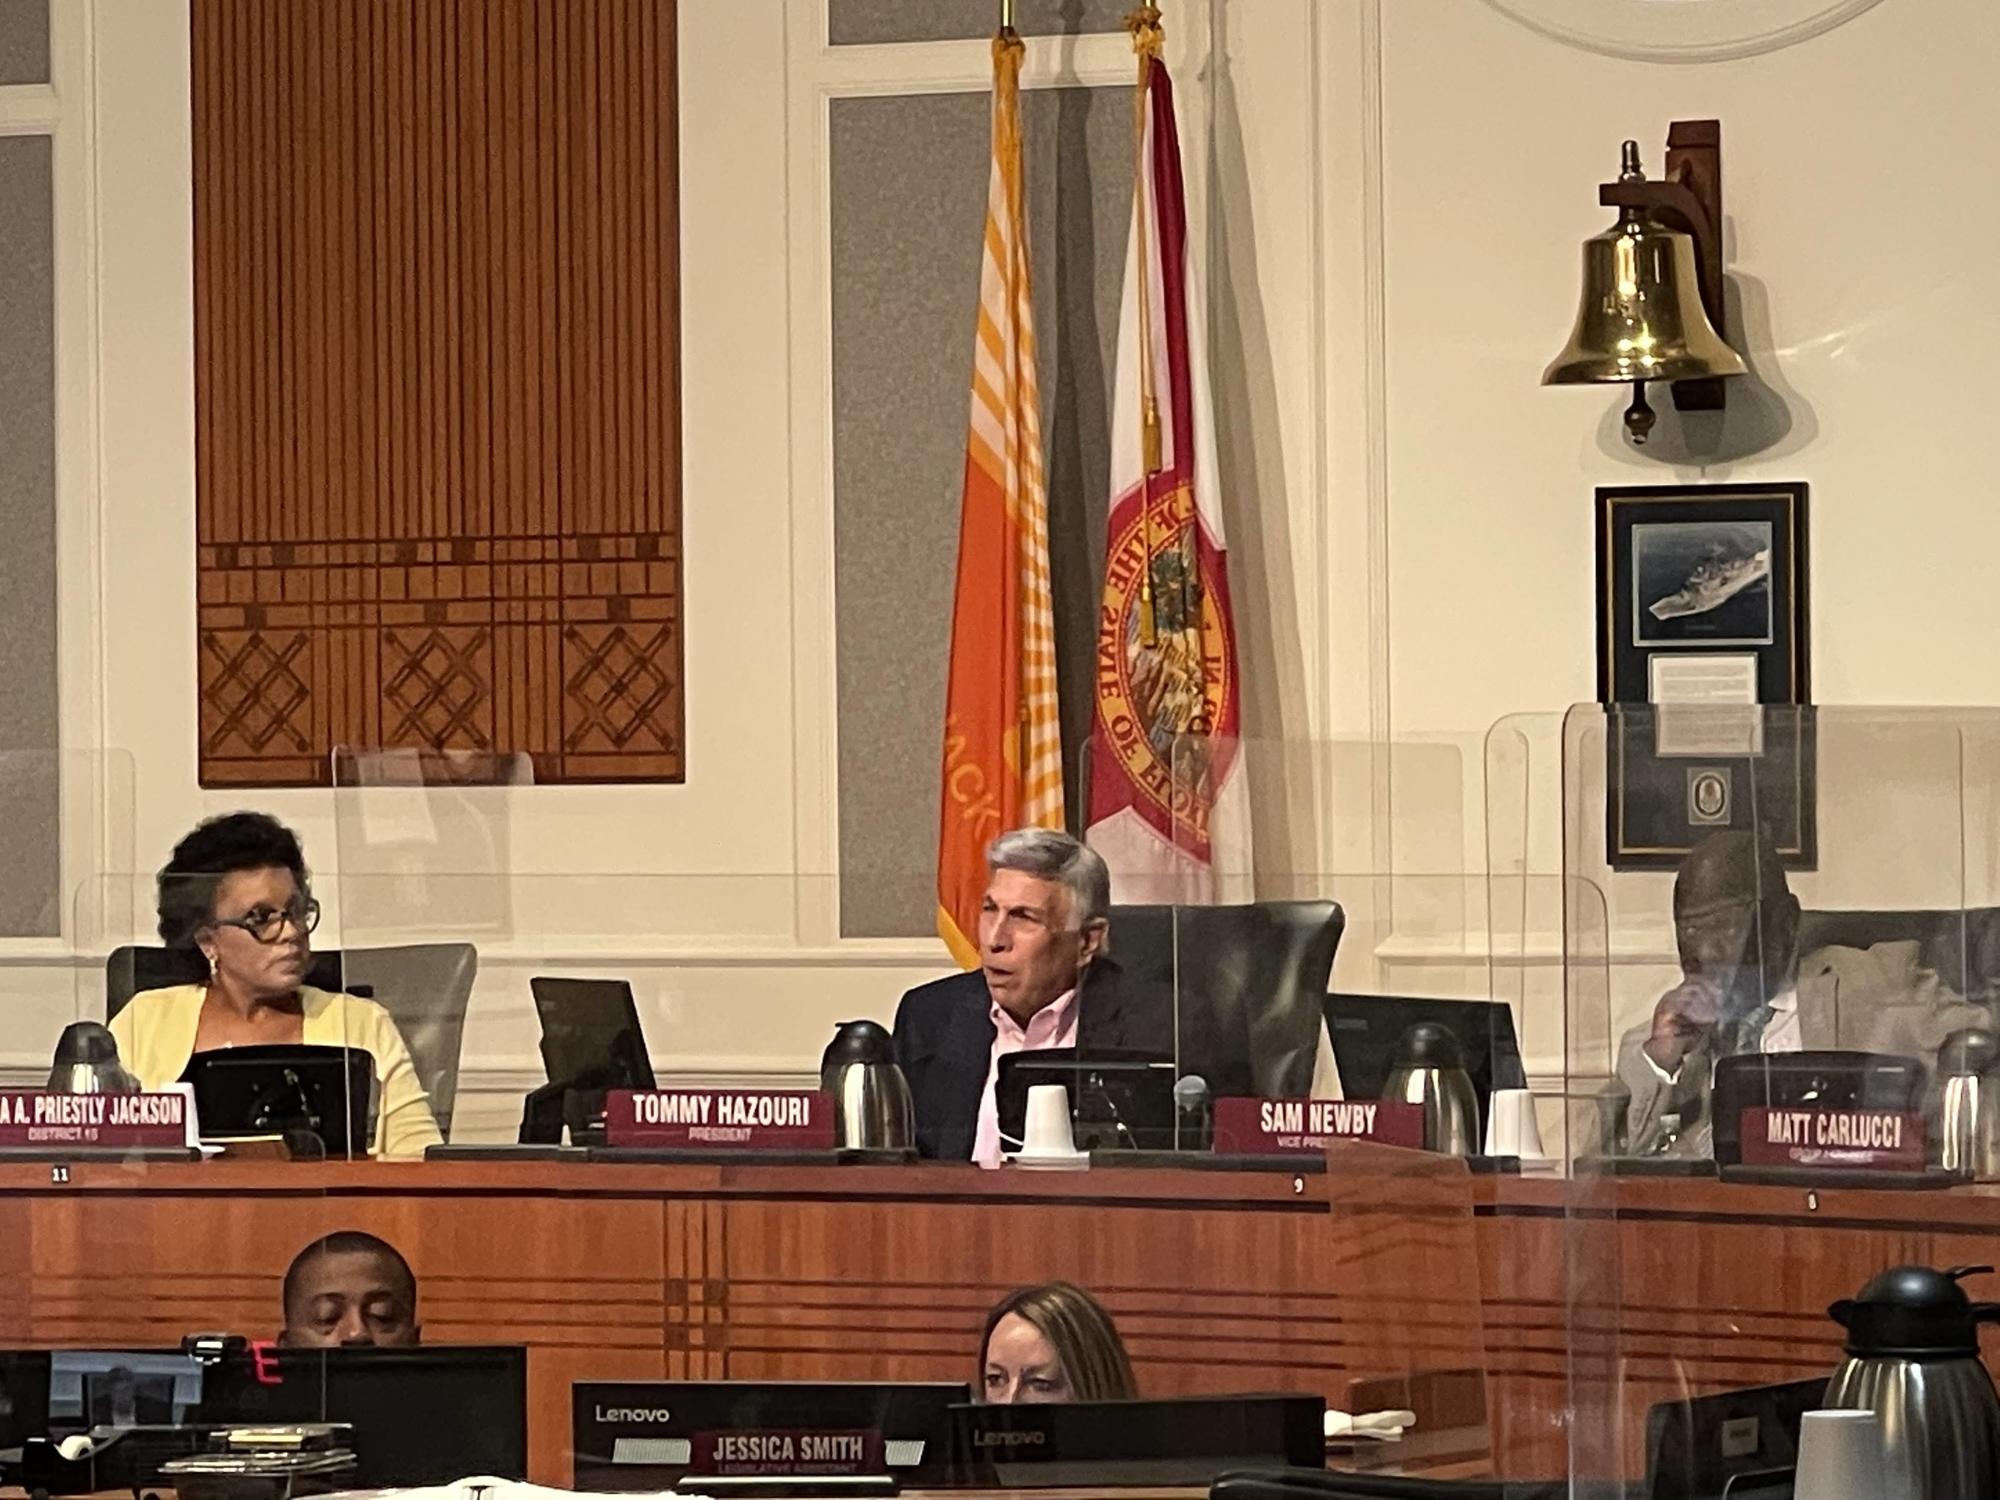 As City Council president, Tommy Hazouri helped Mayor Lenny Curry to introduce and eventually pass a 6-cent local option gasoline tax increase on May 26.